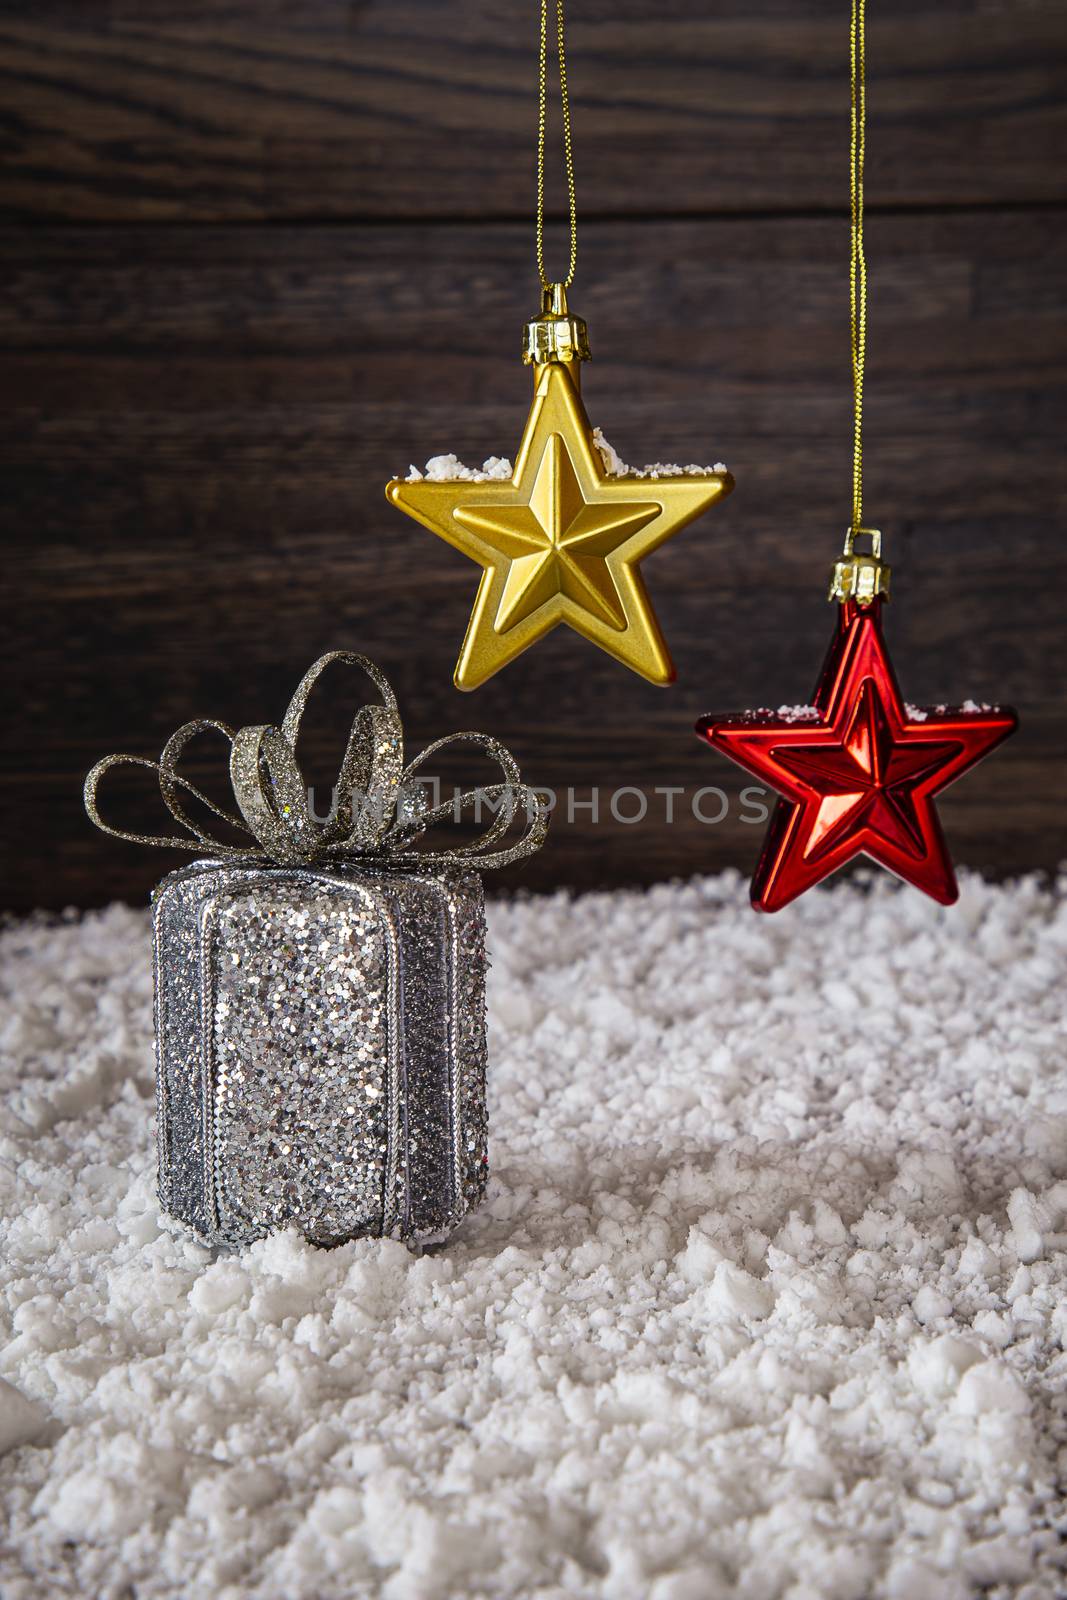 shiny silver present with red and gold star, in the snow in front of a wood background